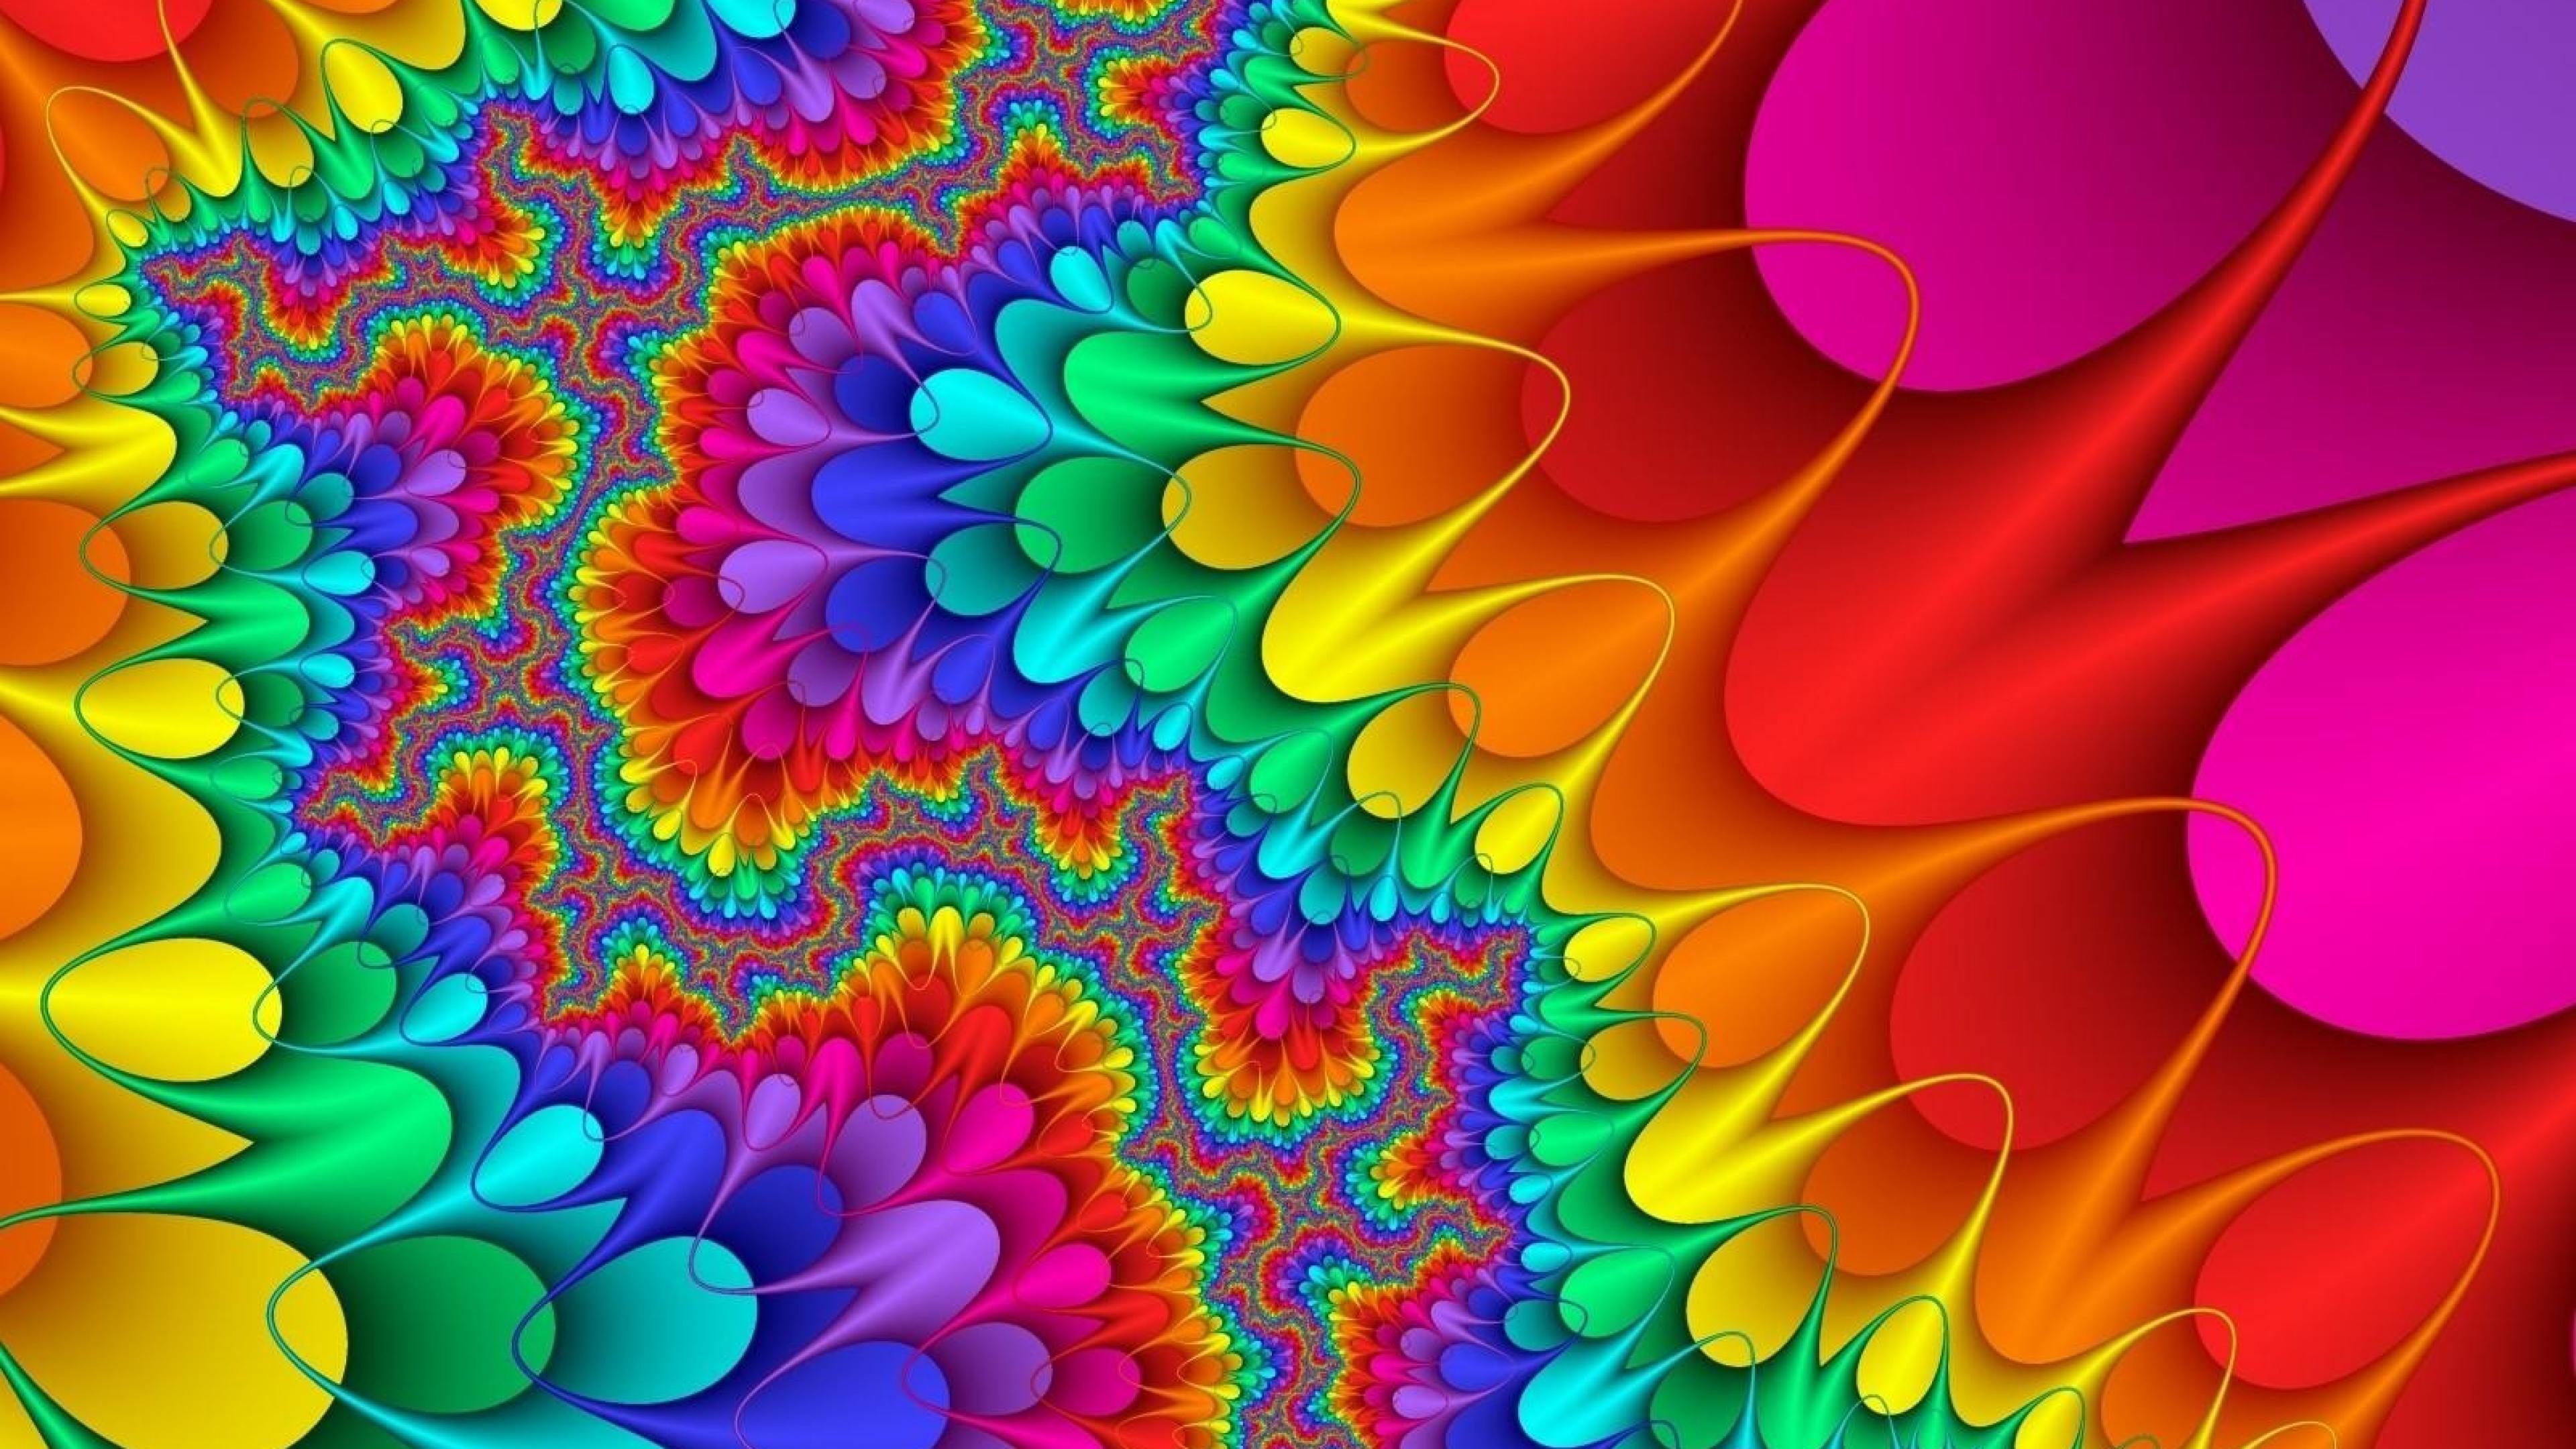 Abstract Colorful Wallpapers - Wallpaper Cave